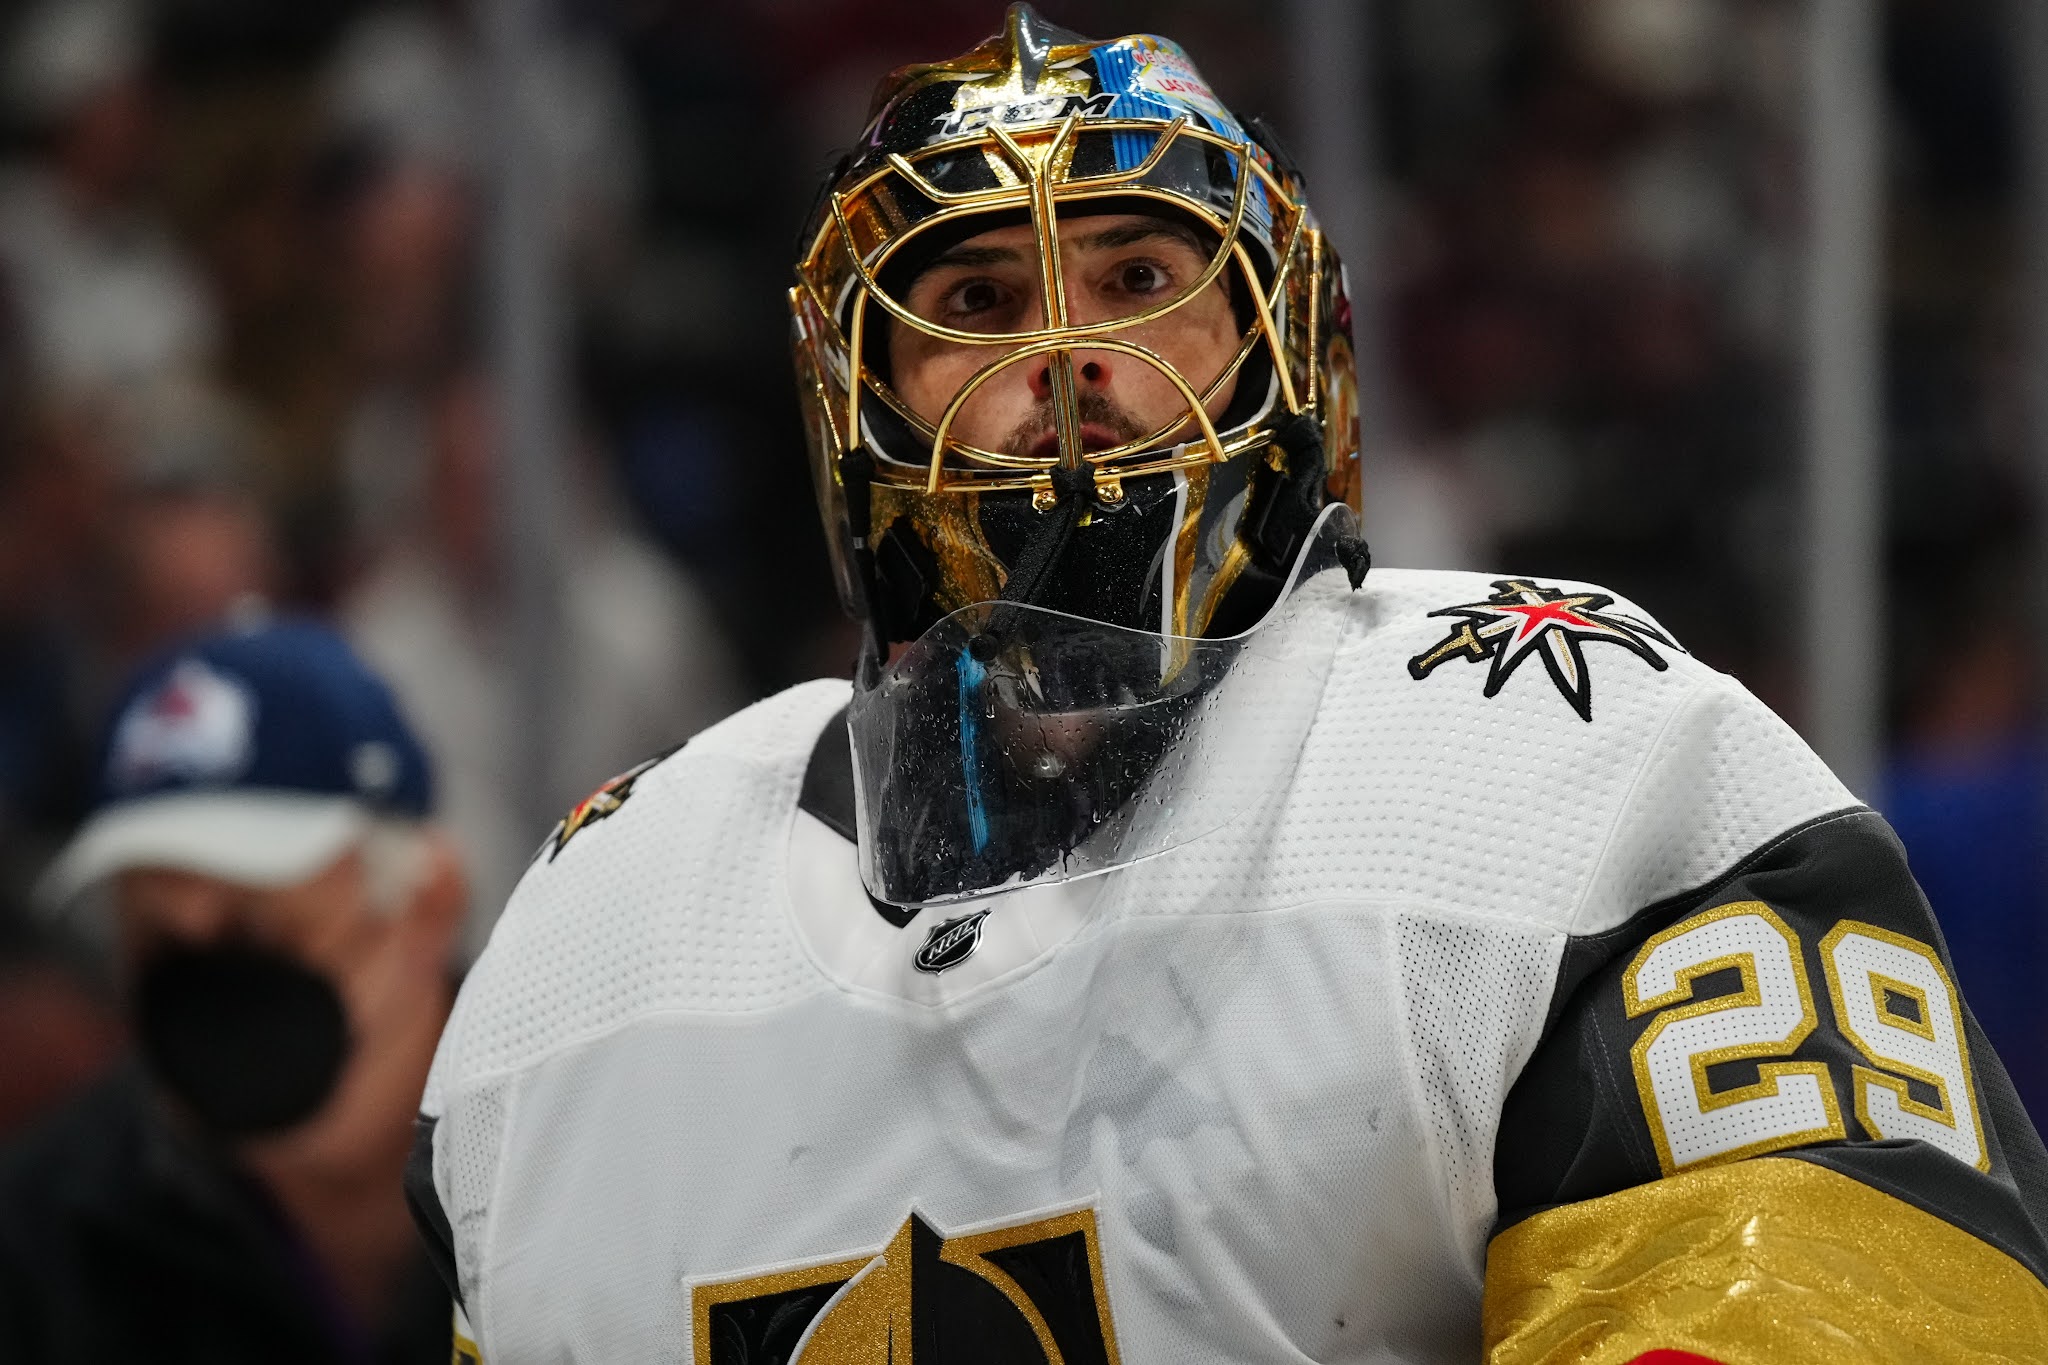 Marc-Andre Fleury in the Hot Seat